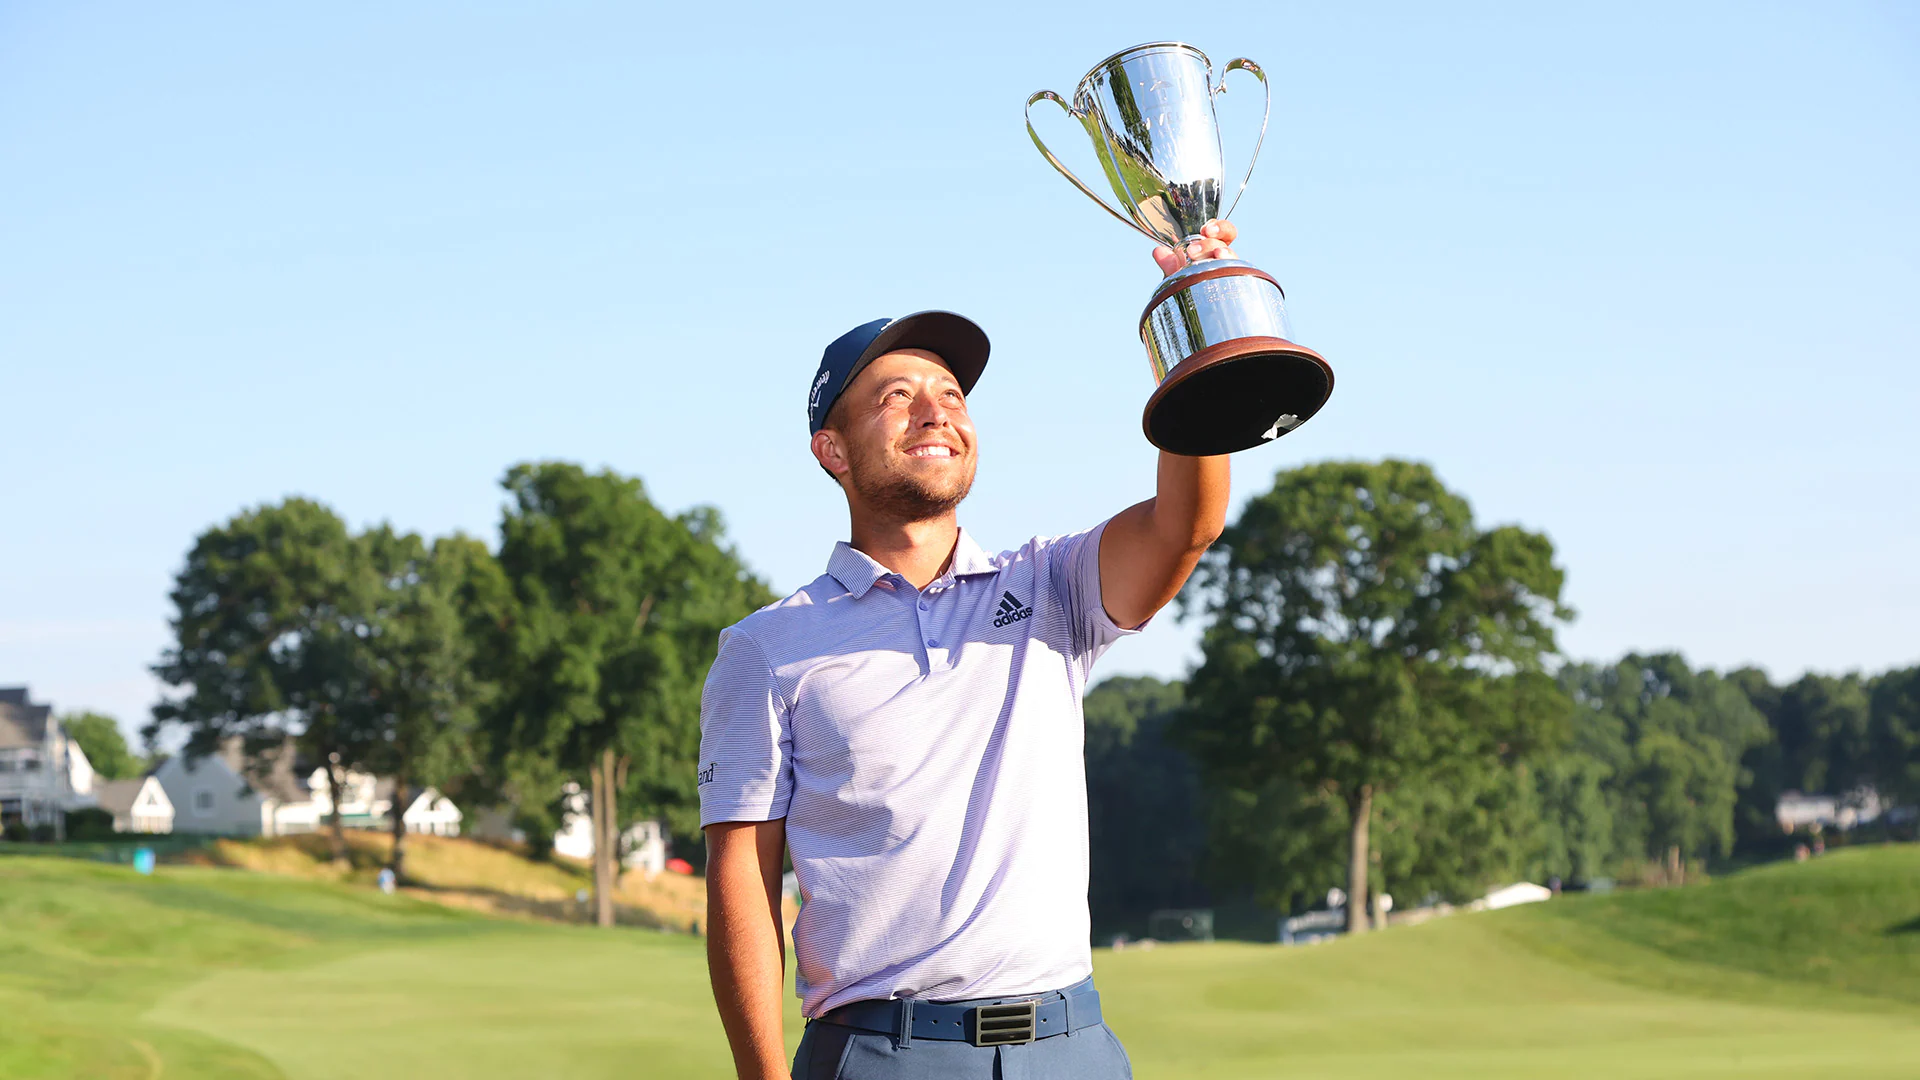 Xander Schauffele jumps to 11th in the world after winning the Travelers Championship